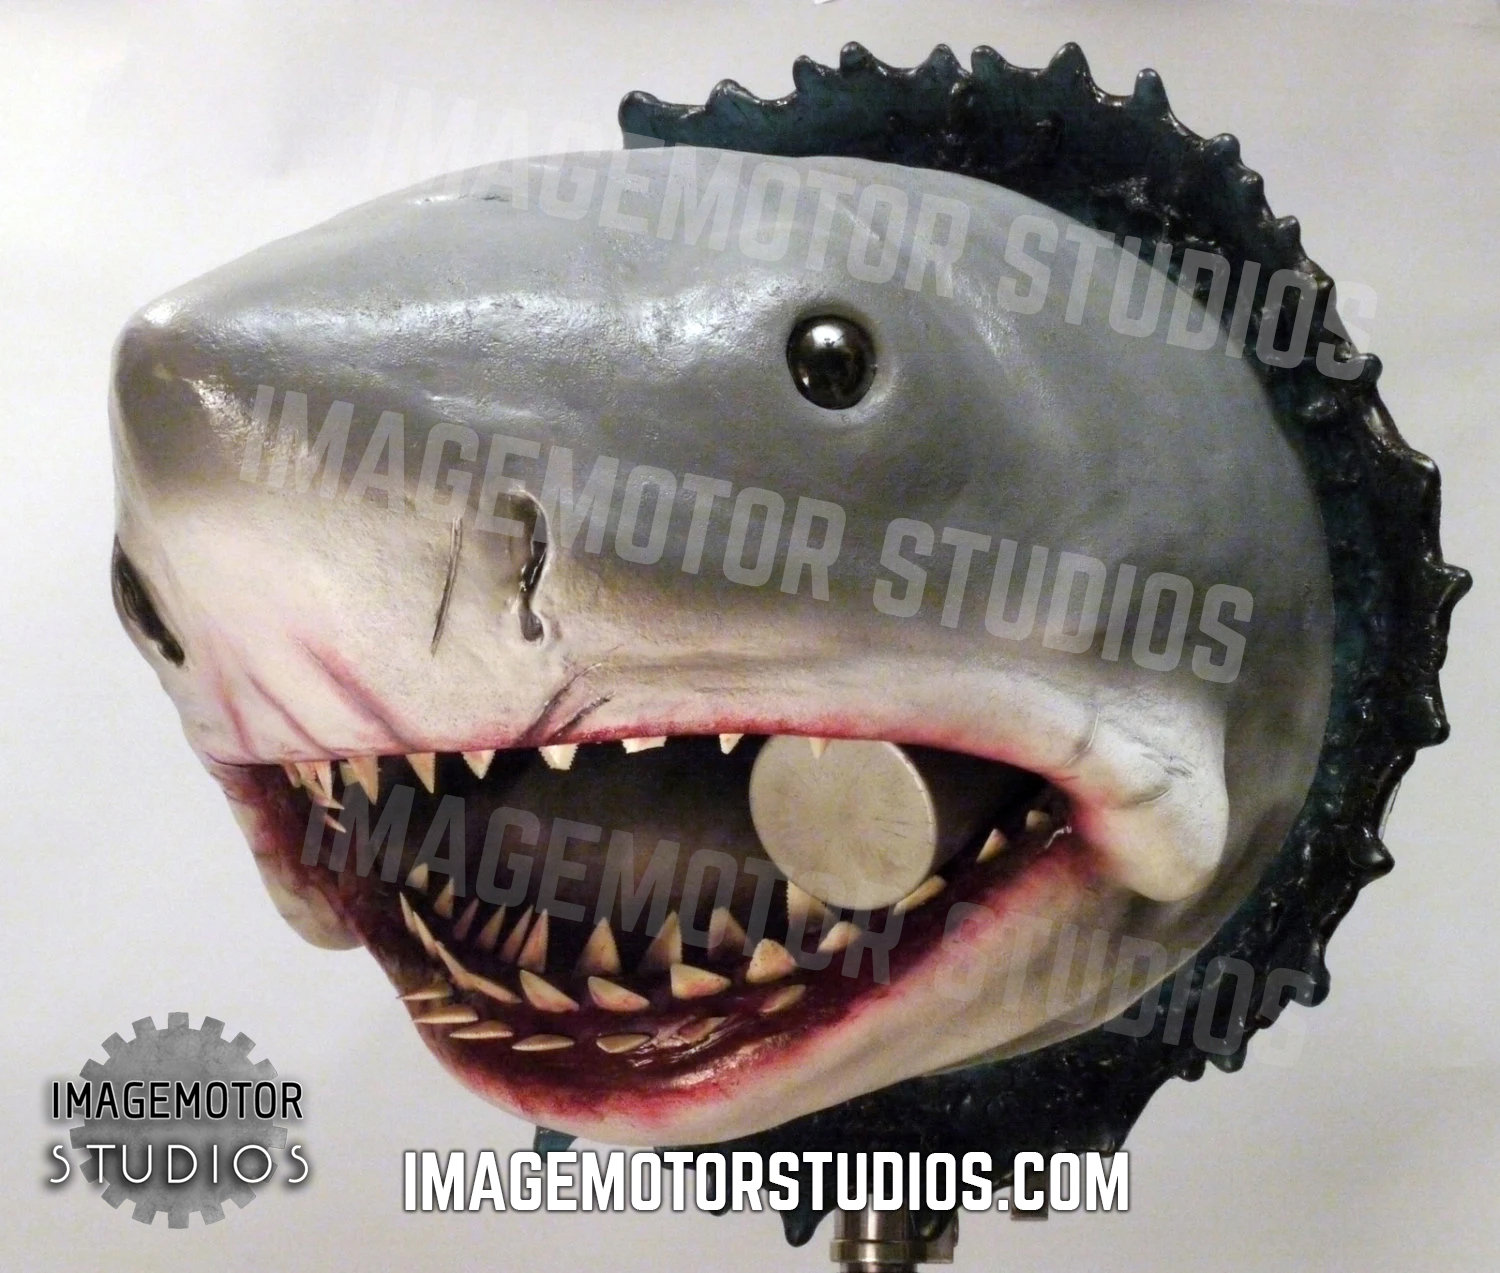 Buy Large Bruce the Shark Jaws Wall Hanging Bust Prop Online in